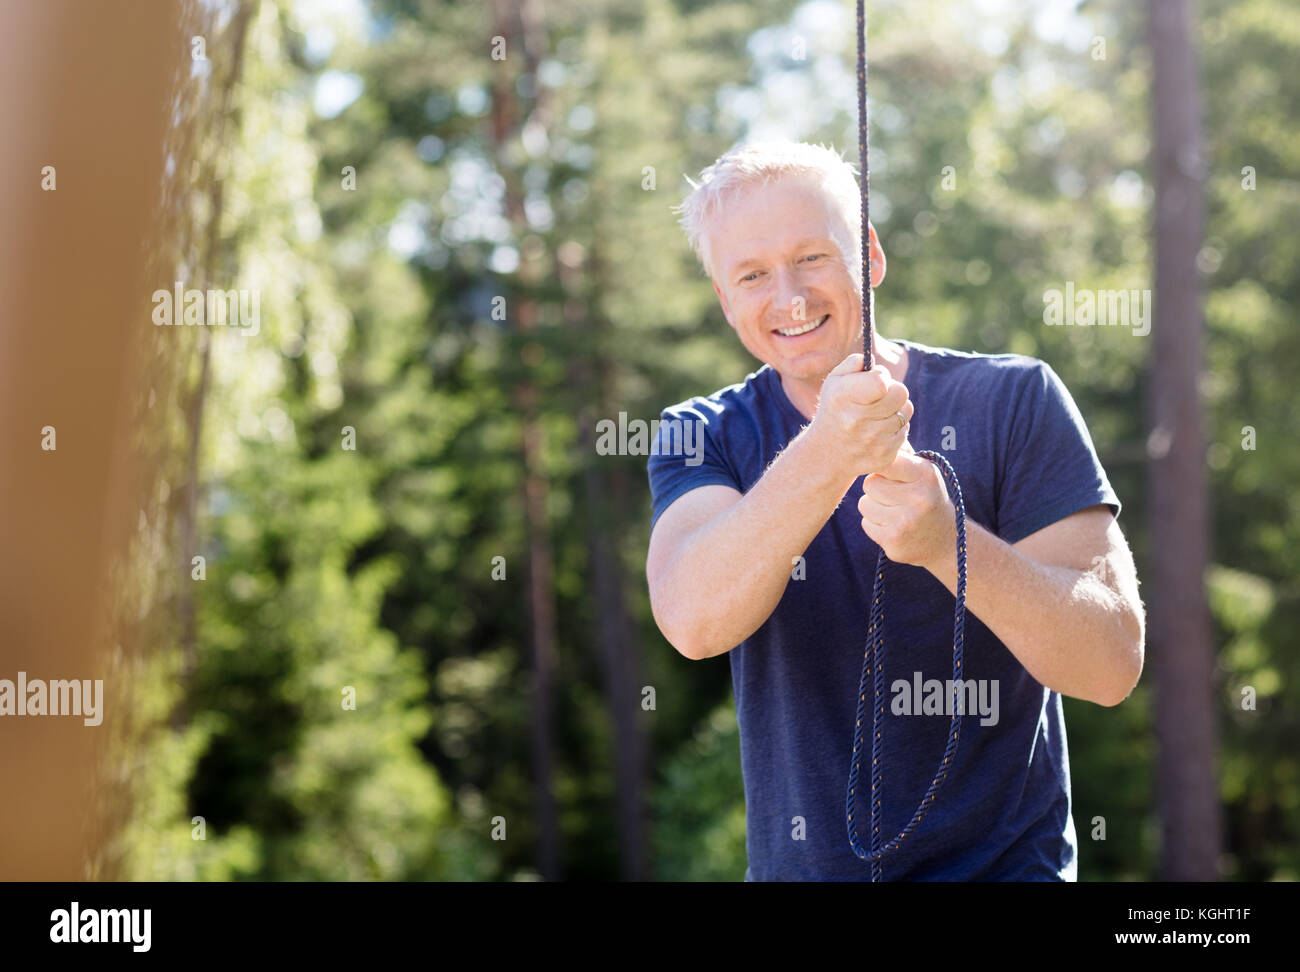 Man smiling while holding rope in forest Banque D'Images